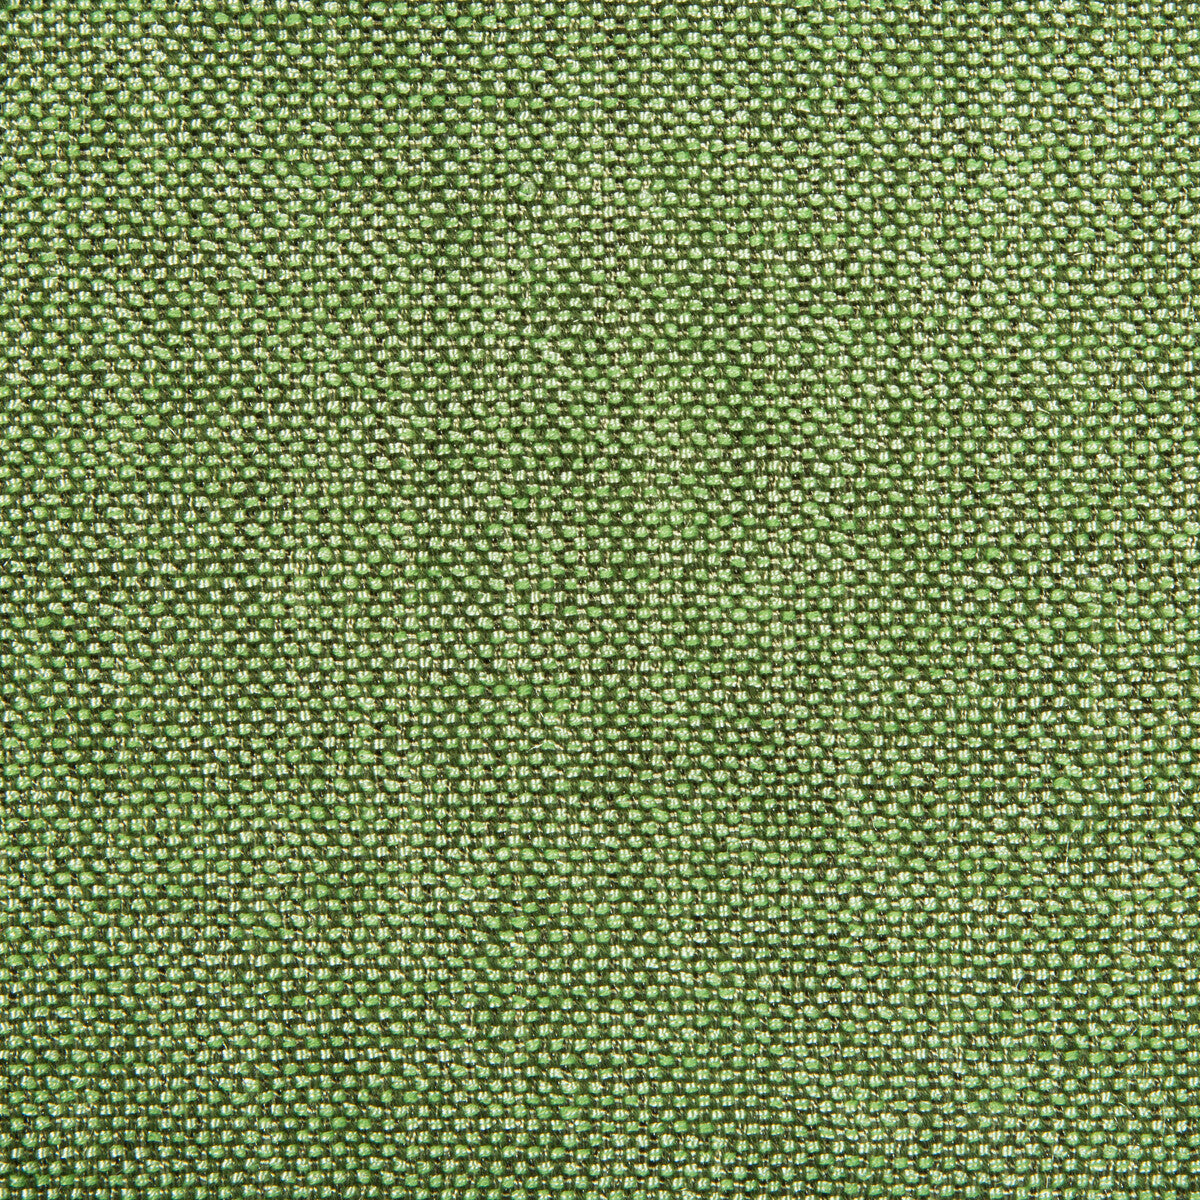 Kravet Contract fabric in 34926-323 color - pattern 34926.323.0 - by Kravet Contract